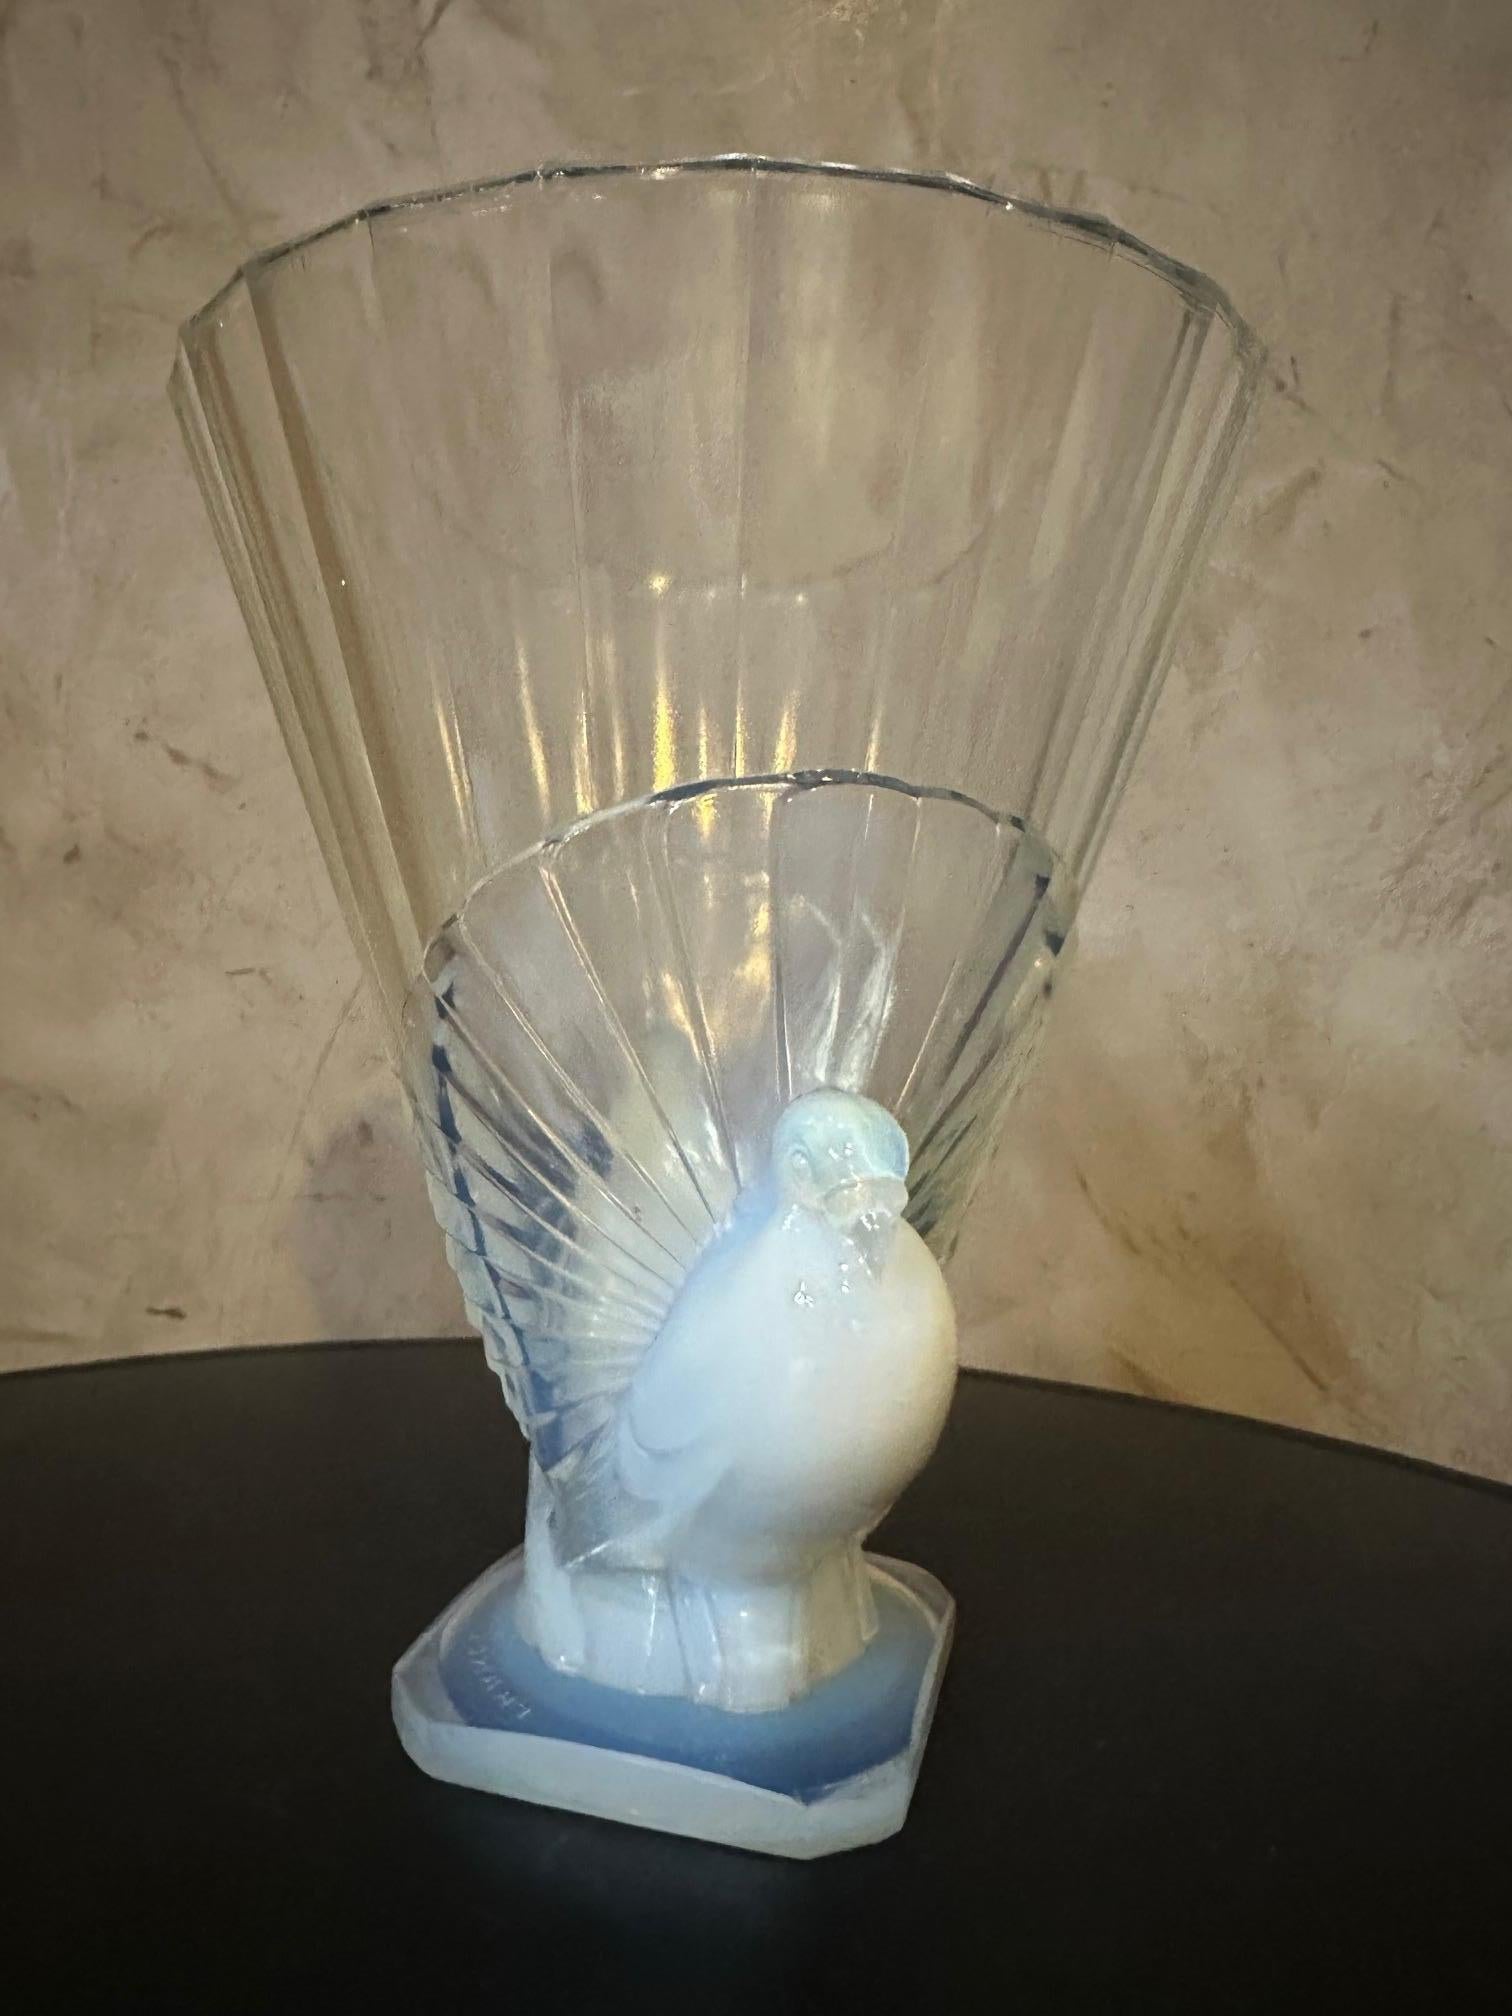 20th century French Art Deco Opalescent Glass Sabino Vase, 1930s For Sale 2